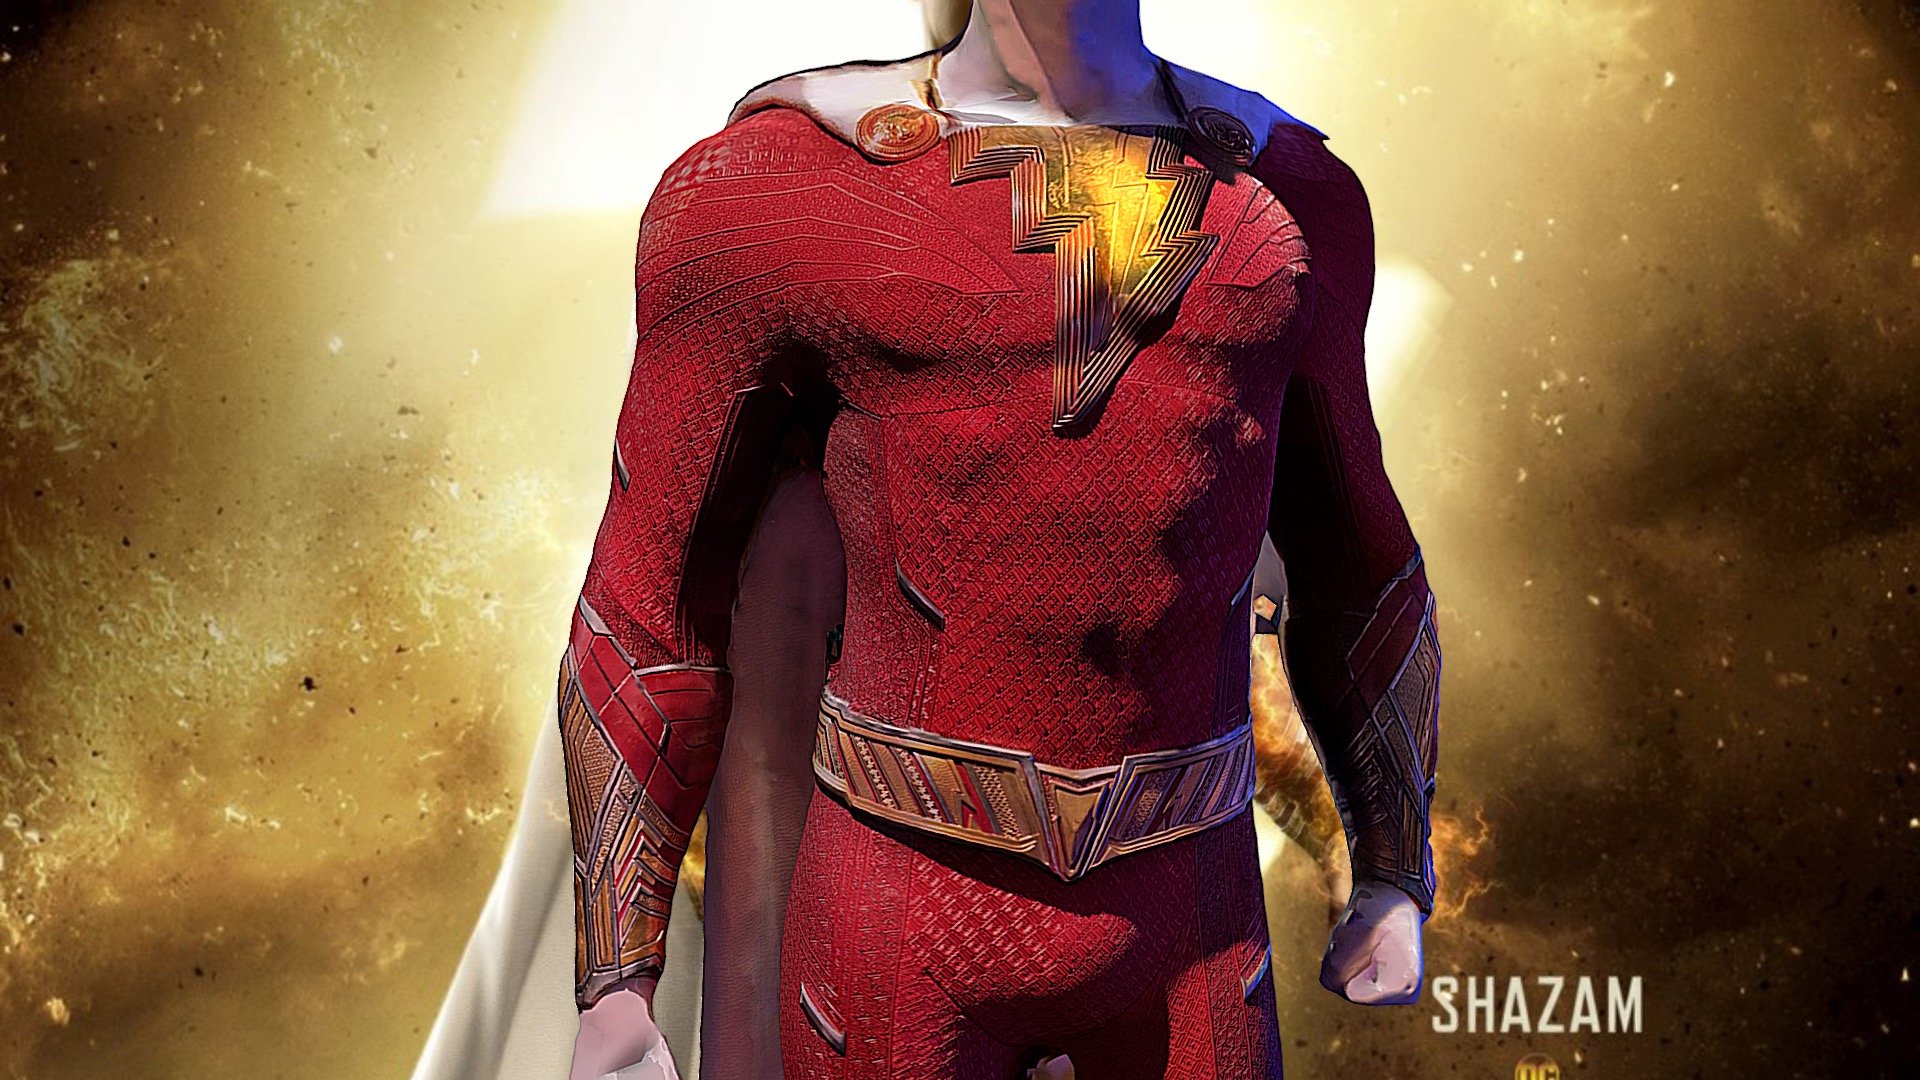 This is a highly-detailed 3D model of the screen-used suit from the movie Shazam! The suit was  scanned in 2 passes using the Scaniverse app, resulting in a highly-accurate replica that truly captures the essence of the iconic costume. Every detail of the suit is carefully rendered, from the vibrant red and gold color scheme to the intricate patterns and textures of the material. The suit features a muscle-enhancing design, which adds an extra layer of realism to the model. Whether you're a fan of the movie or just appreciate finely-crafted 3D models, this Shazam! suit is sure to impress.

Shared for reference - Shazam!  - Screen worn Suit - Buy Royalty Free 3D model by Bad Beetle Entertainment (@blackpantherkali) 3d model